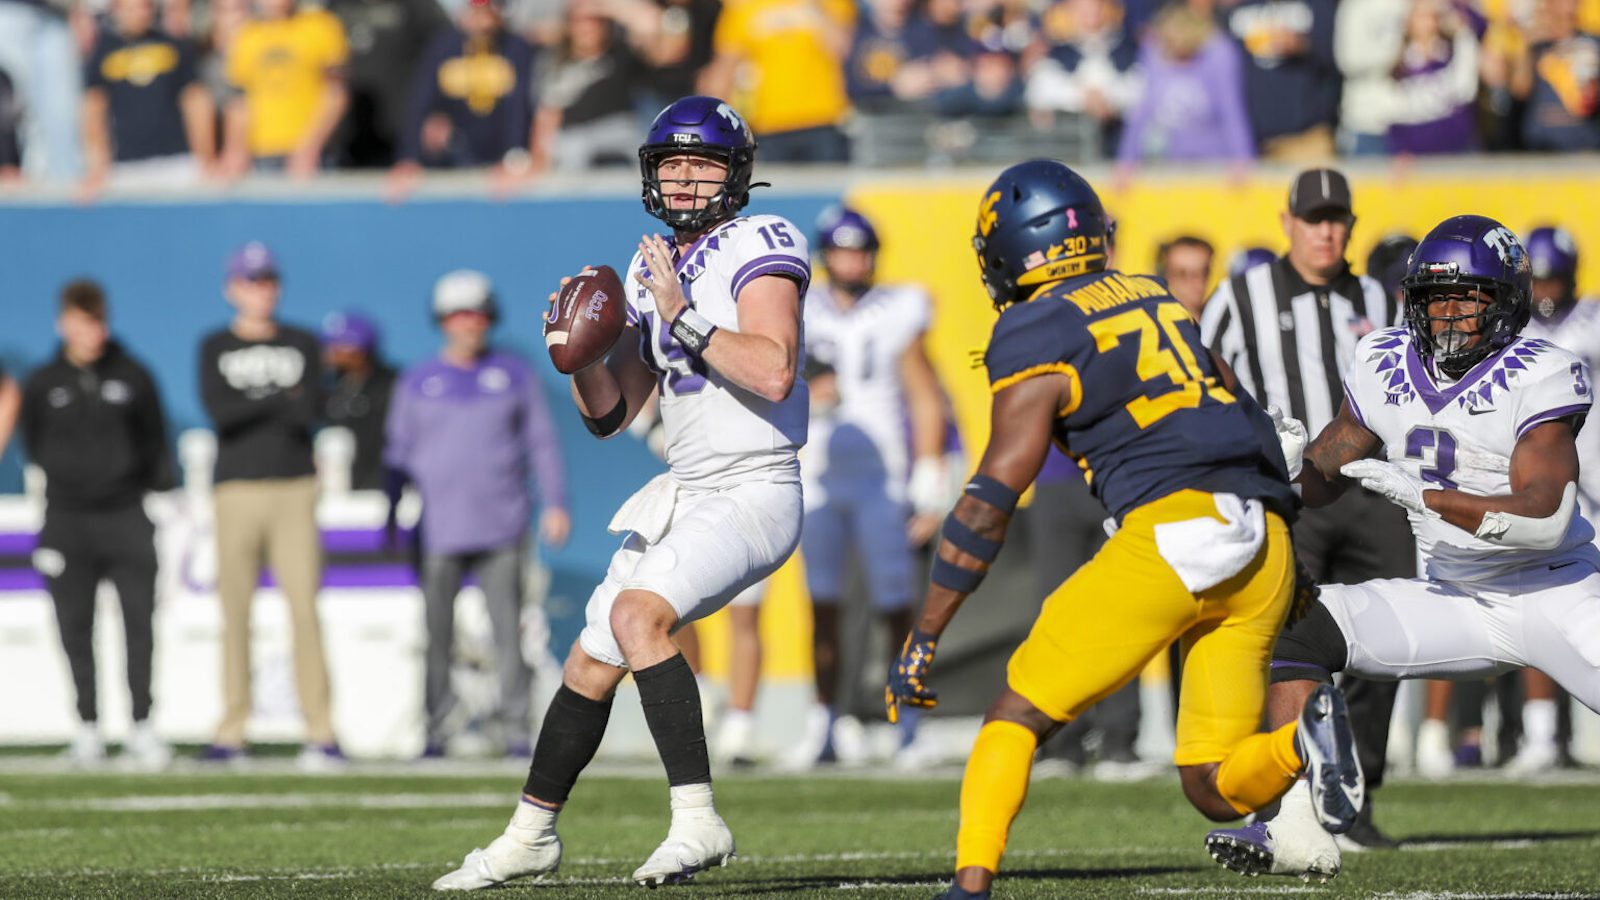 TCU Remains Undefeated, Conquers West Virginia 41-31